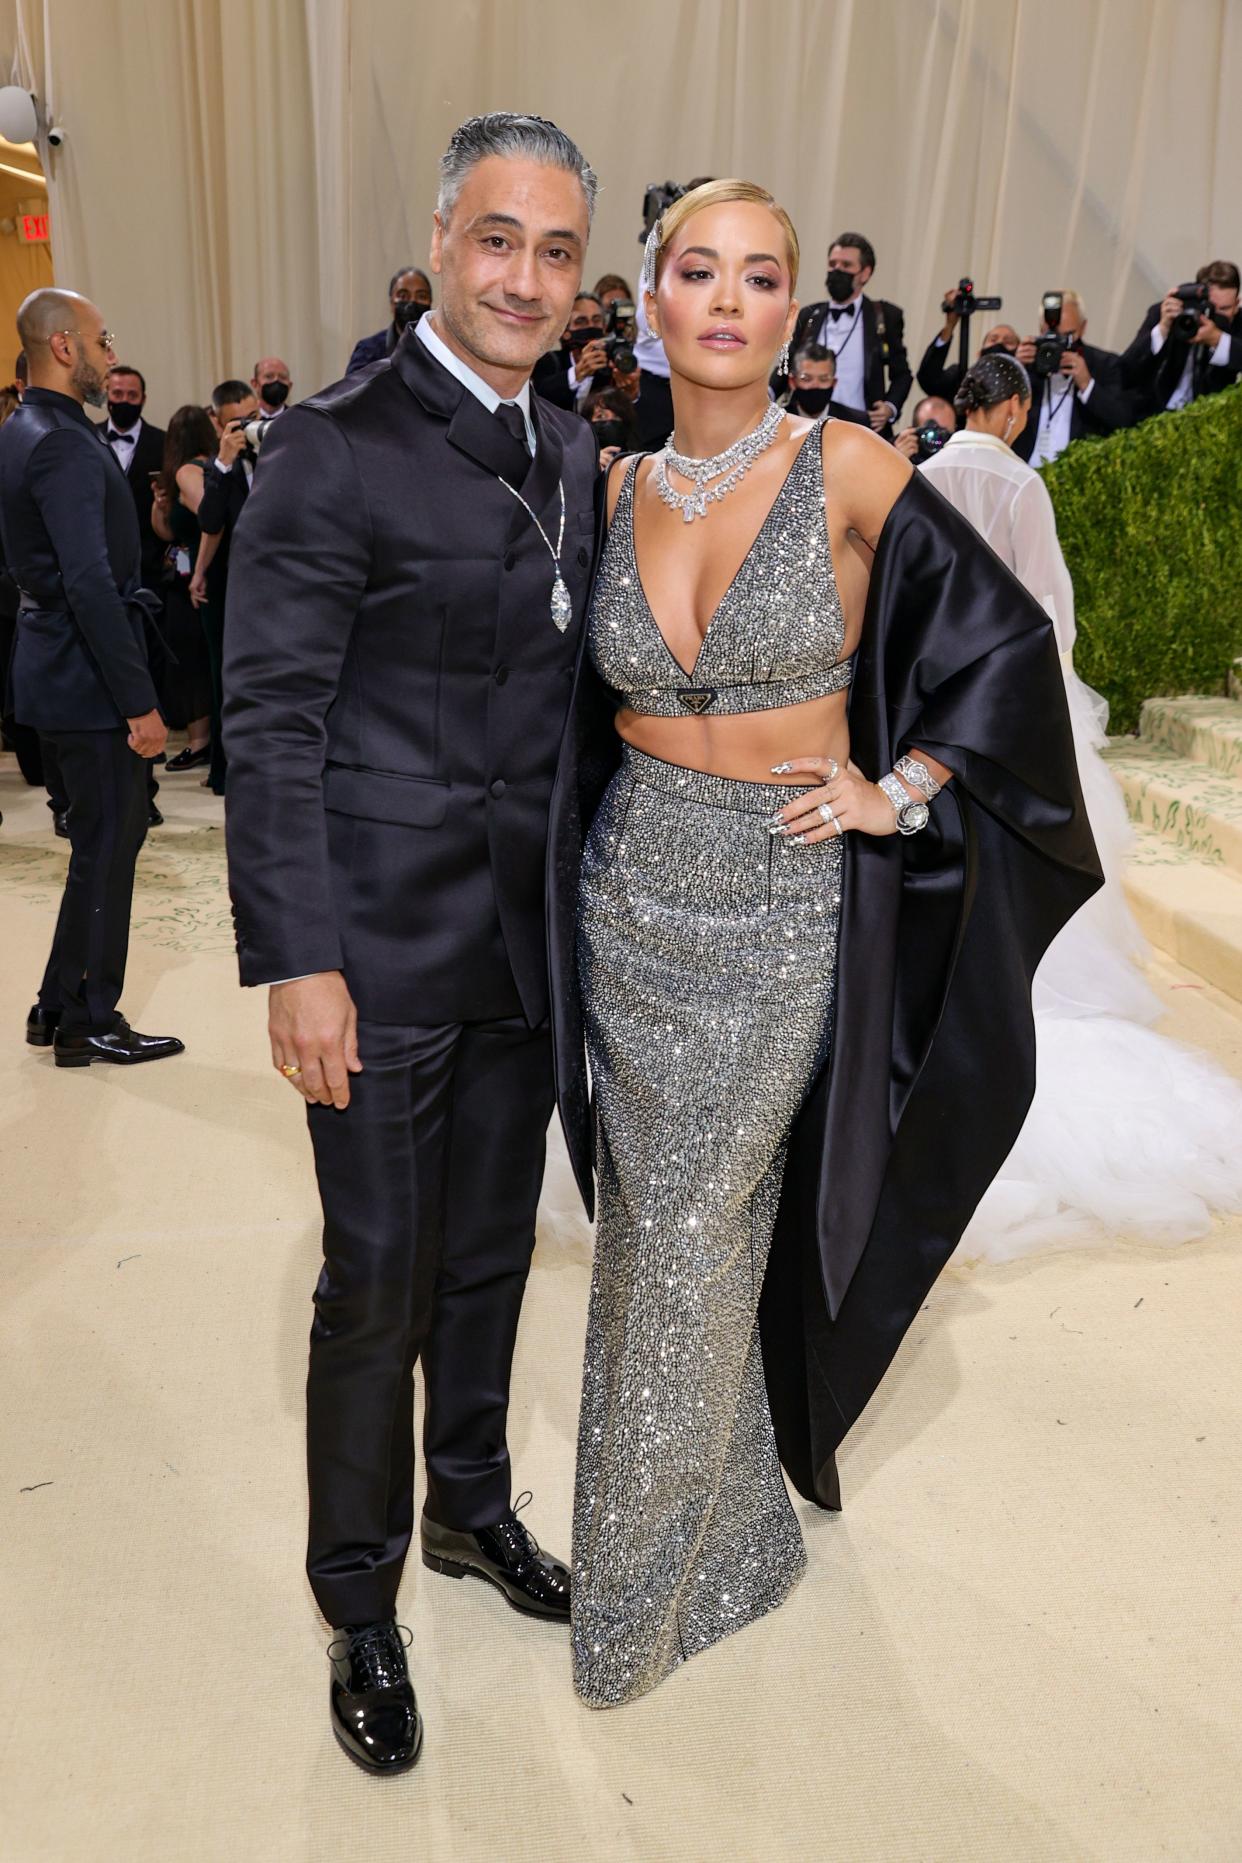 Taika Waititi and Rita Ora attend The 2021 Met Gala Celebrating In America: A Lexicon Of Fashion at Metropolitan Museum of Art on Sept. 13, 2021 in New York.